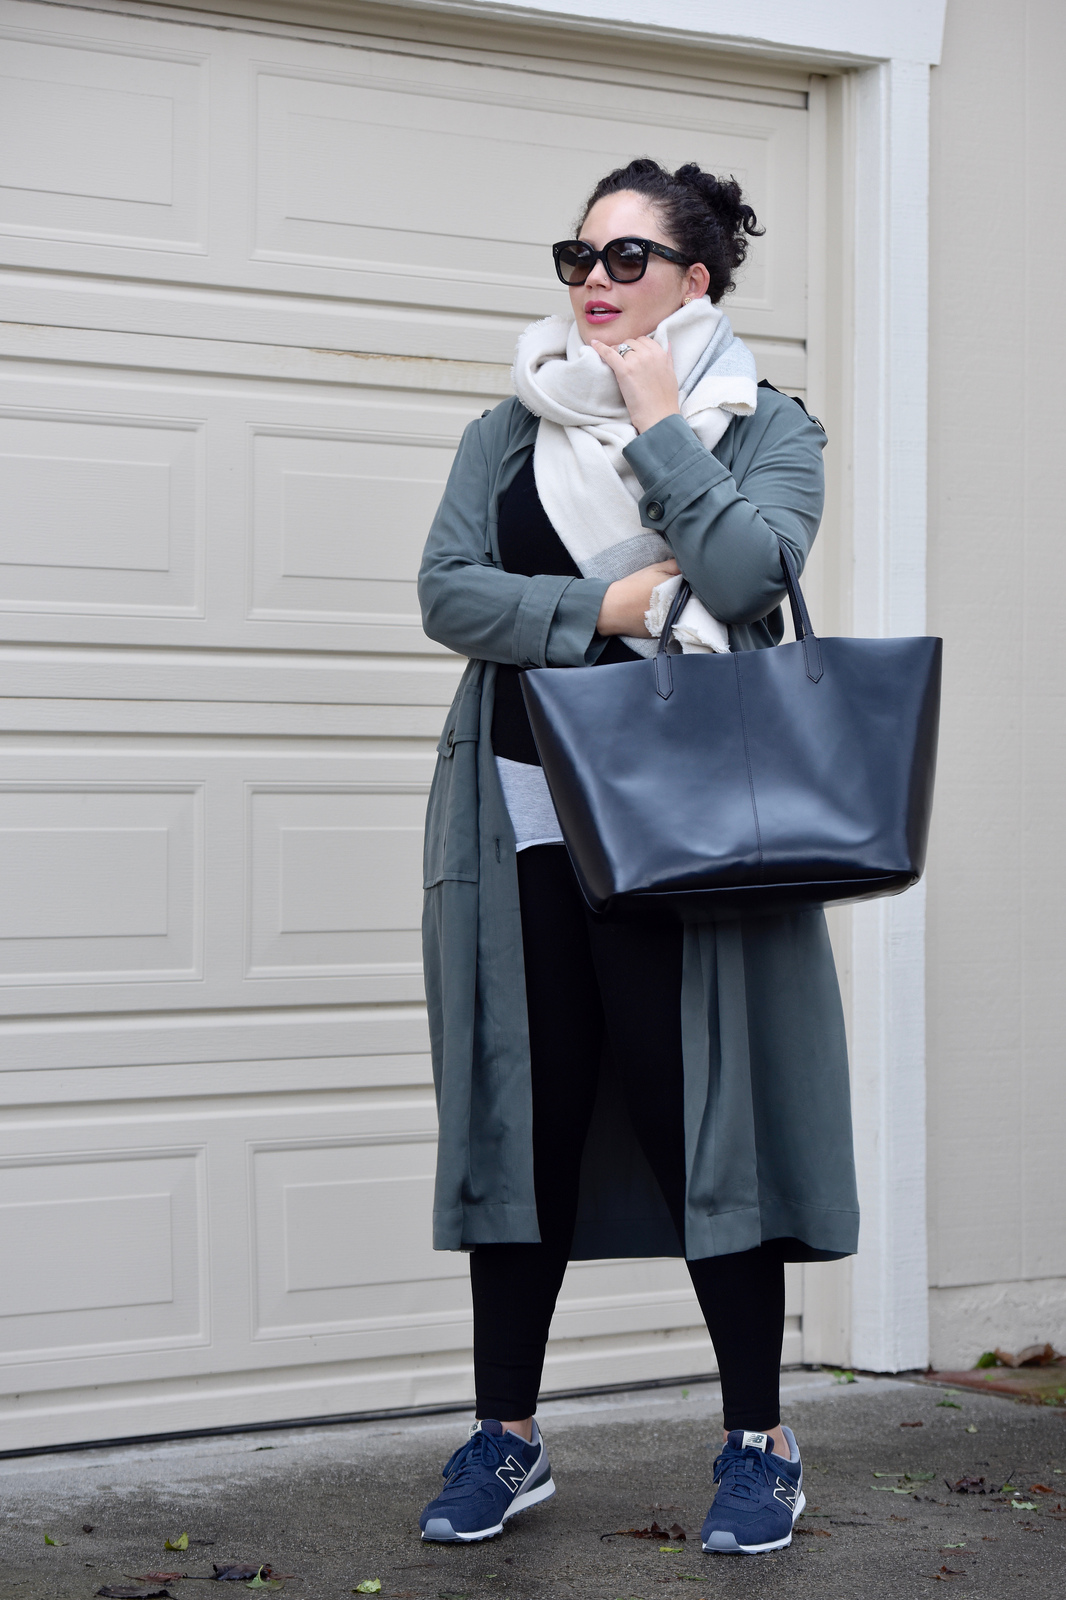 Girl With Curves featuring Trench coat from Asos, Turtleneck from Forever 21, Scarf from Zara, Shoes from New Balance, leggings from Lysse,Sunglasses from Celine, and handbag from Givenchy